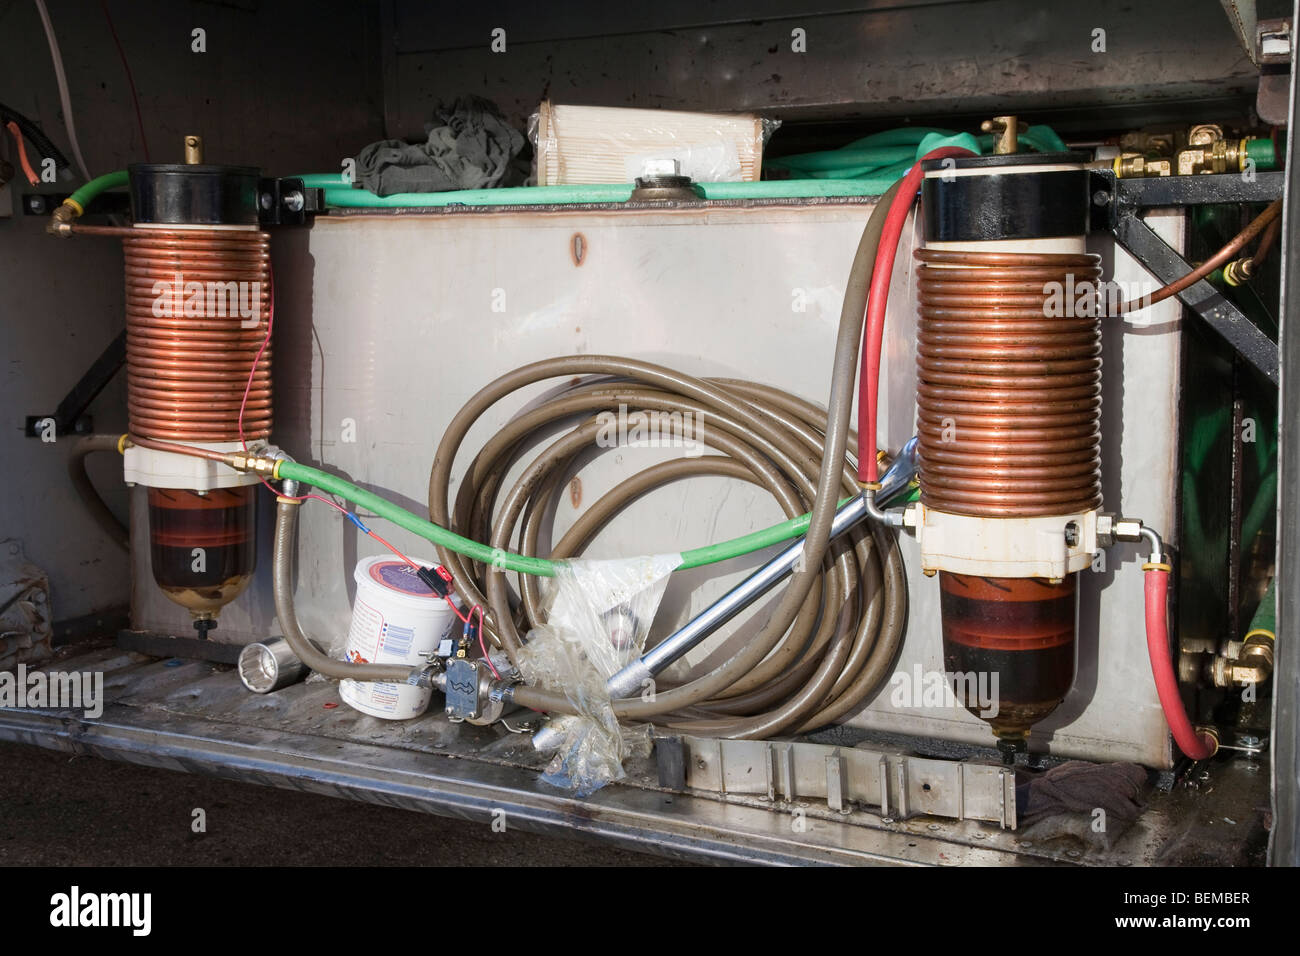 A close up of a vegetable oil storage and filtration system in an luggage compartment of a Common Vision bus. Stock Photo